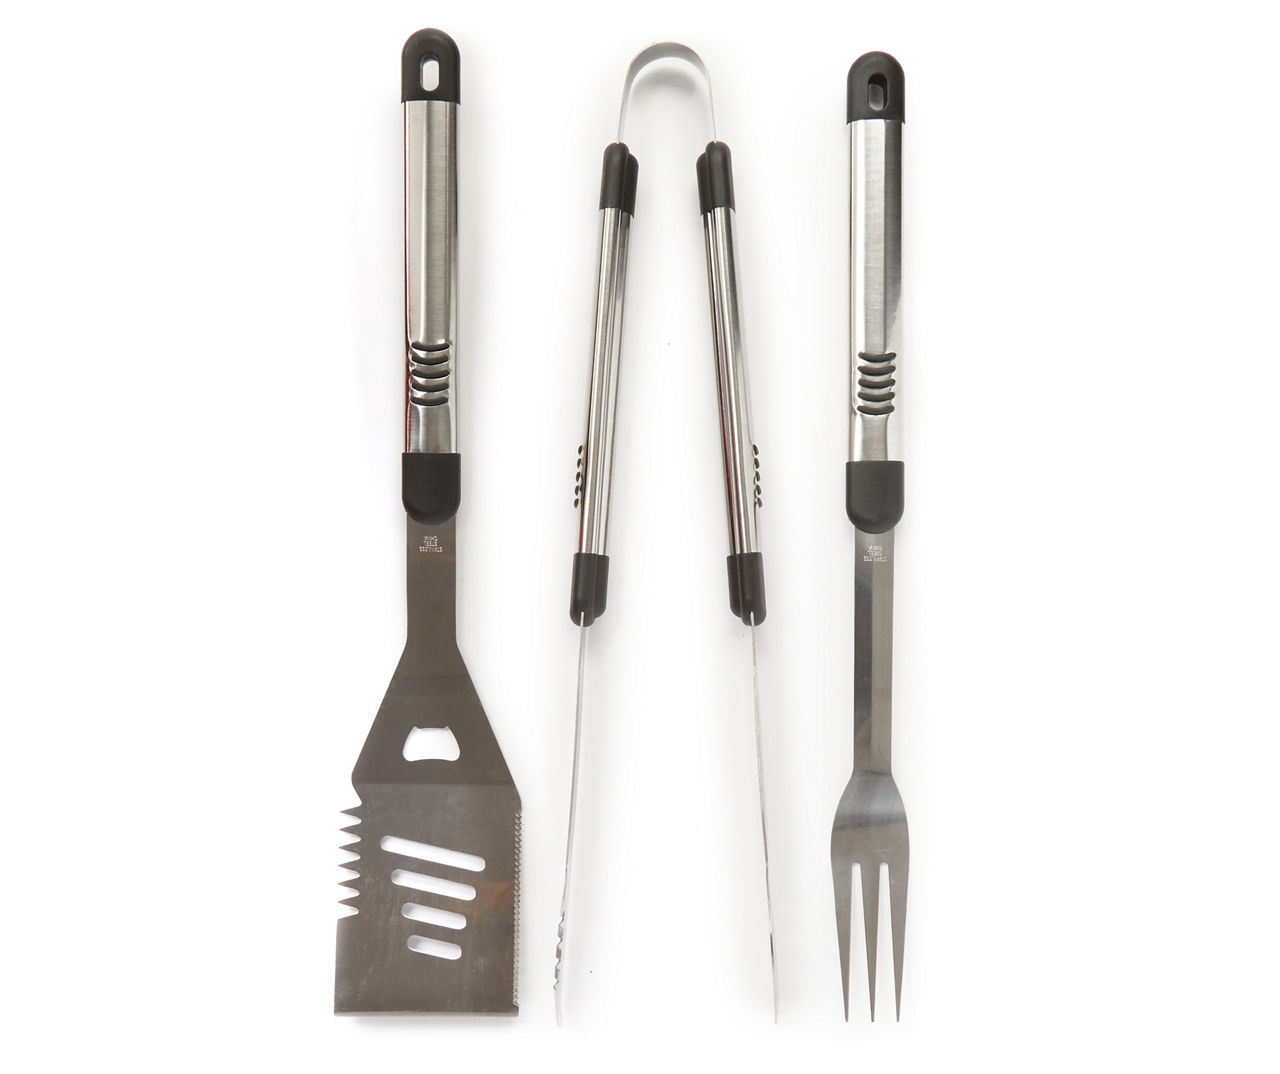 Kingsford Stainless Steel 3 Piece BBQ Tool Set